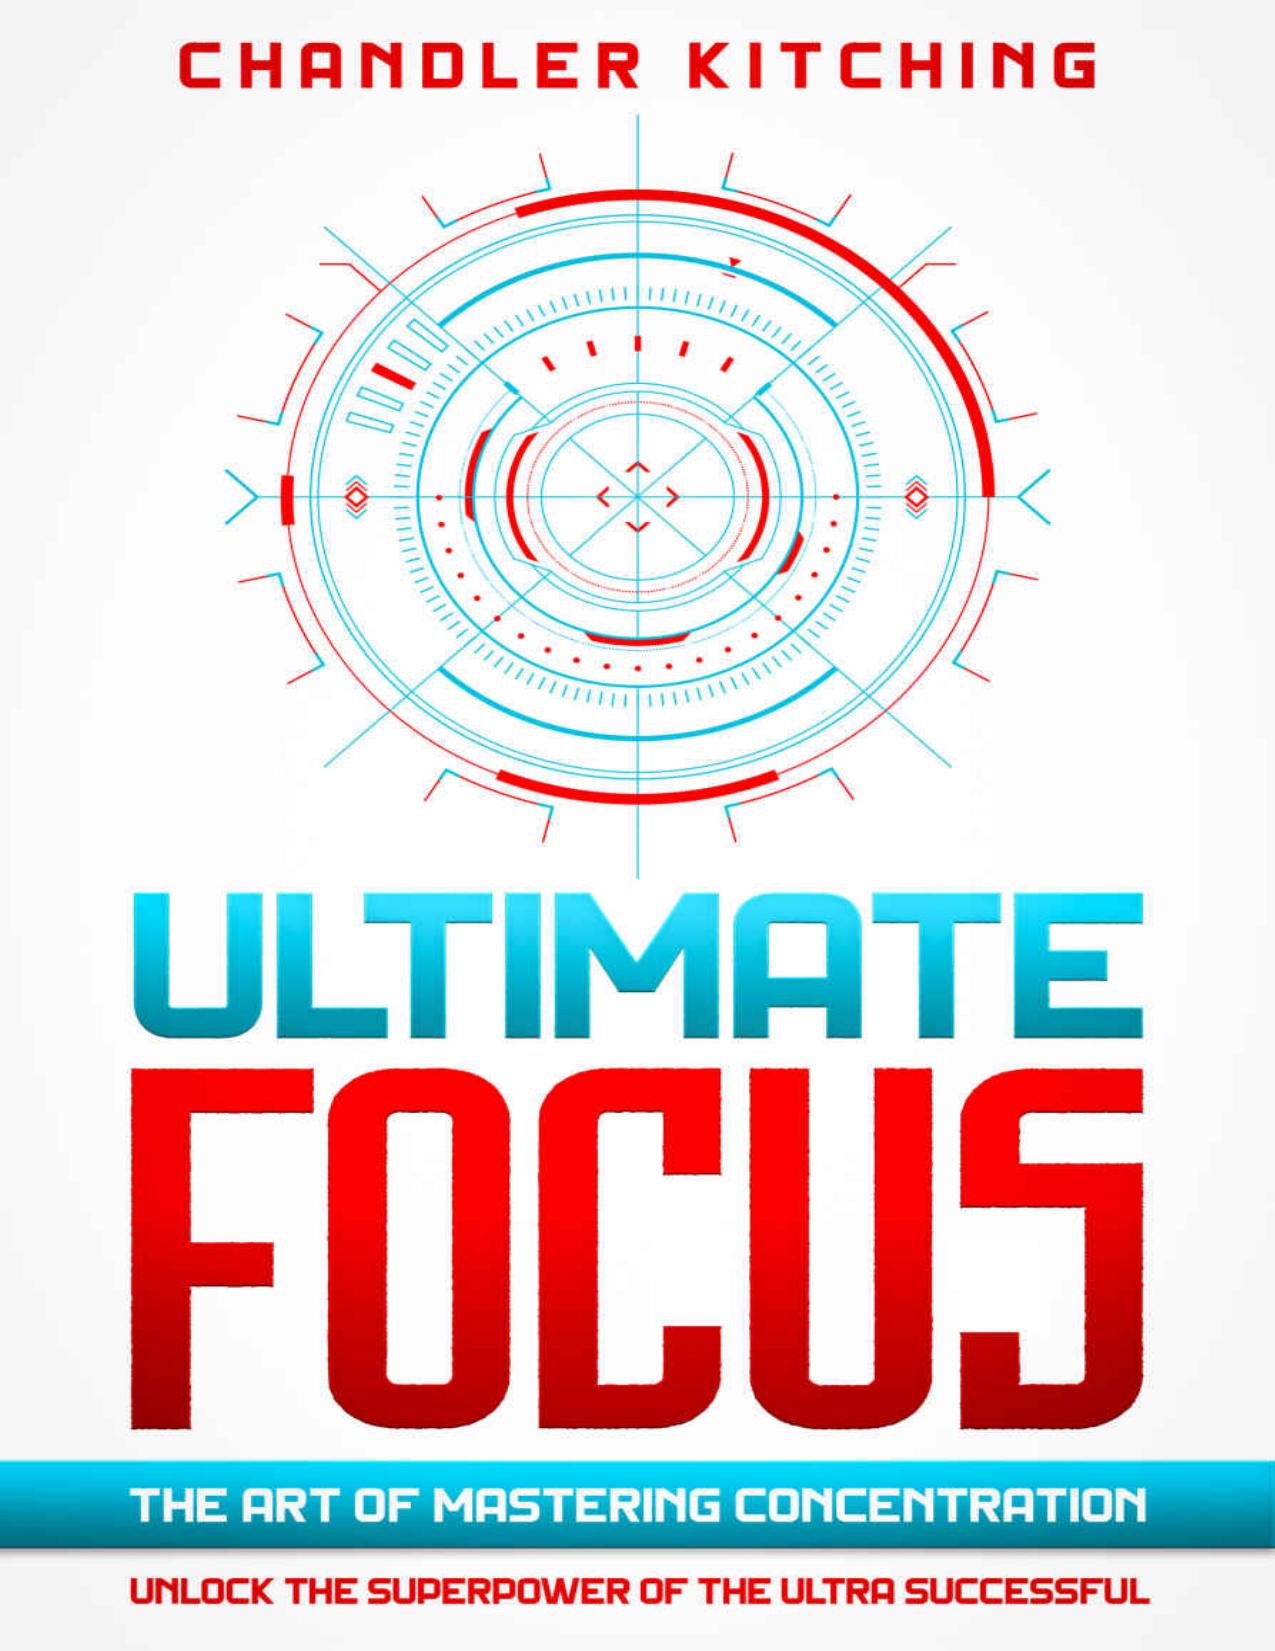 Ultimate Focus: The Art of Mastering Concentration: Unlock the Superpower of the Ultra Successful [In 3 Phases] by Chandler Kitching